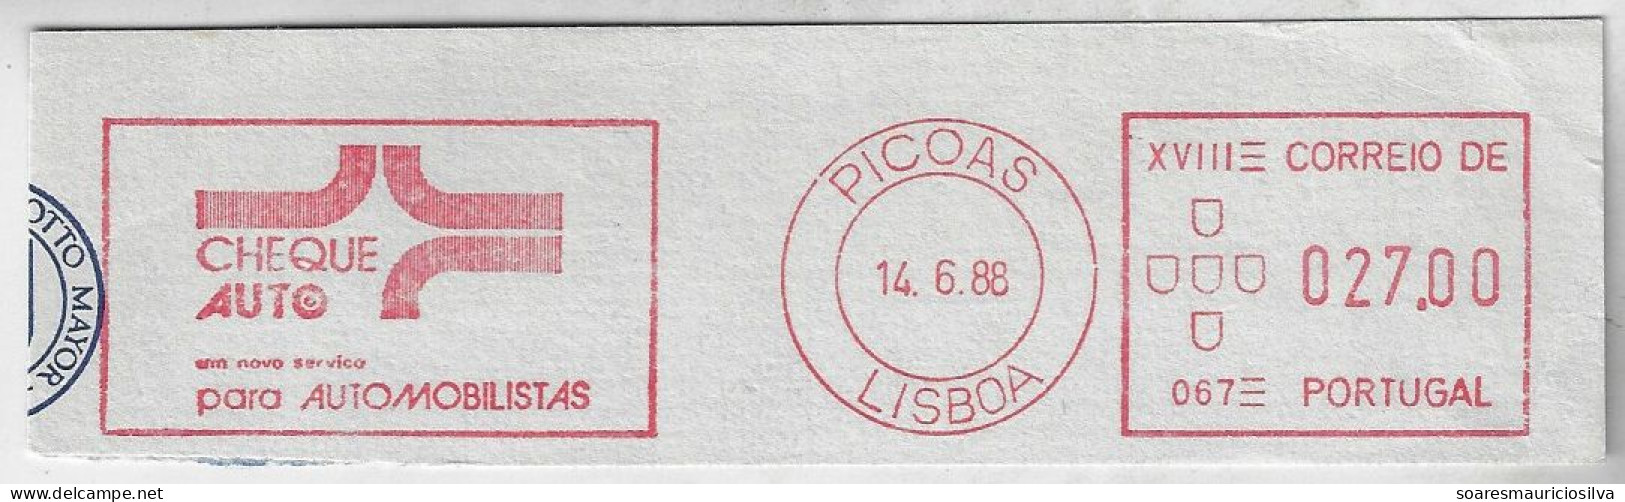 Portugal 1988 Cover Fragment Meter Stamp Hasler Mailmaster Slogan Check Auto A New Service For Motorists Lisbon Picoa - Briefe U. Dokumente